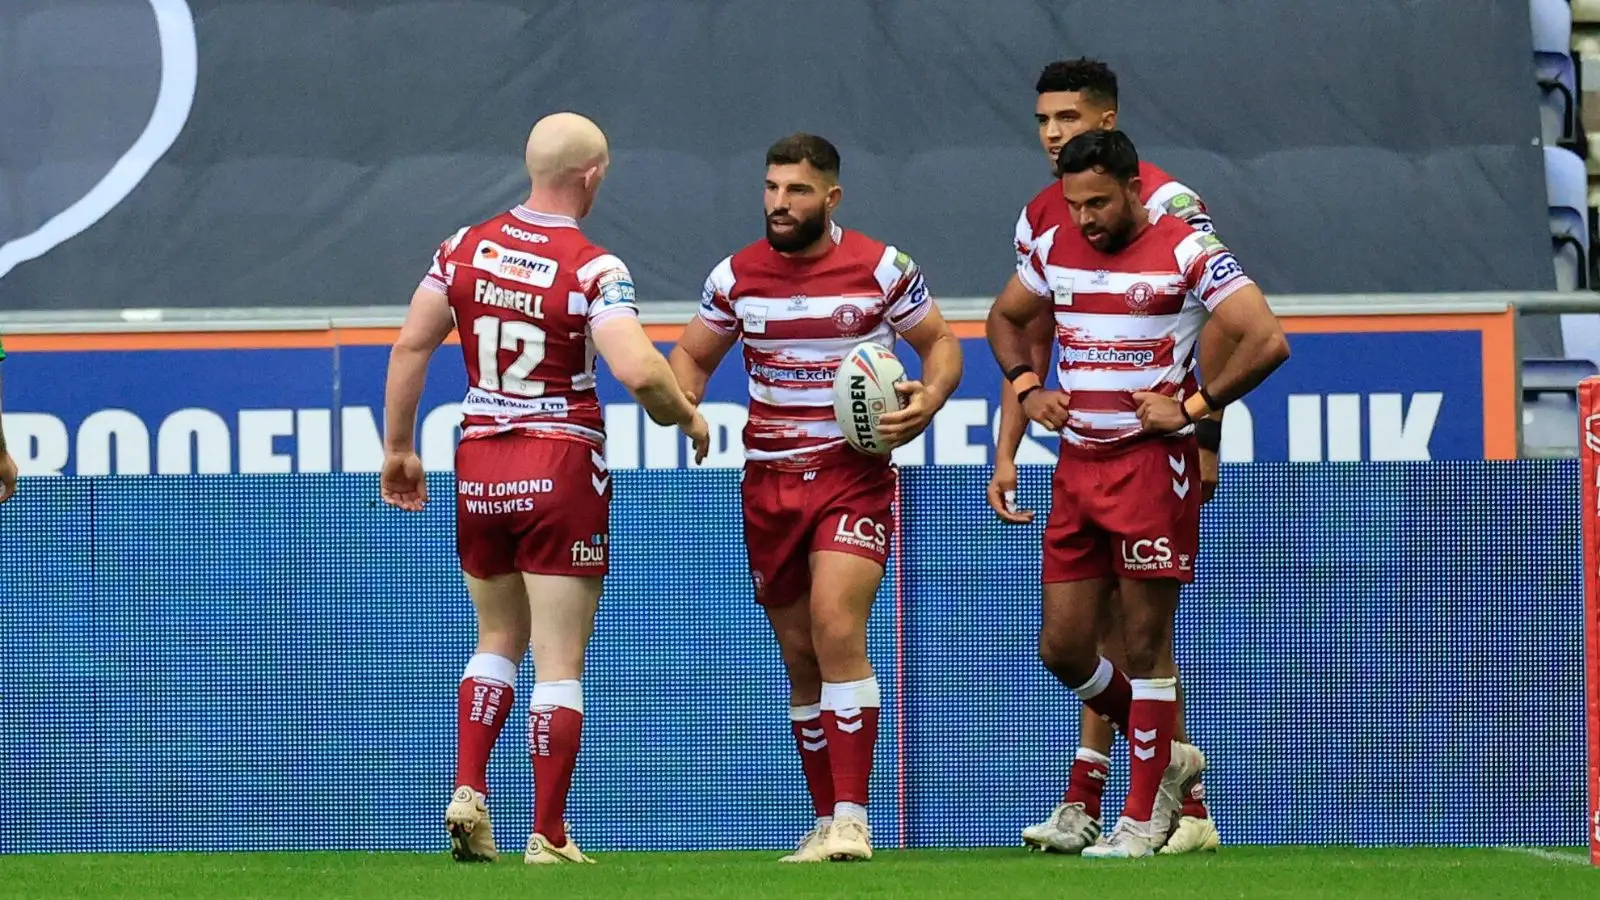 Wigan Warriors boss hails four-try Abbas Miski: ‘A great advert for perseverance and hard work’